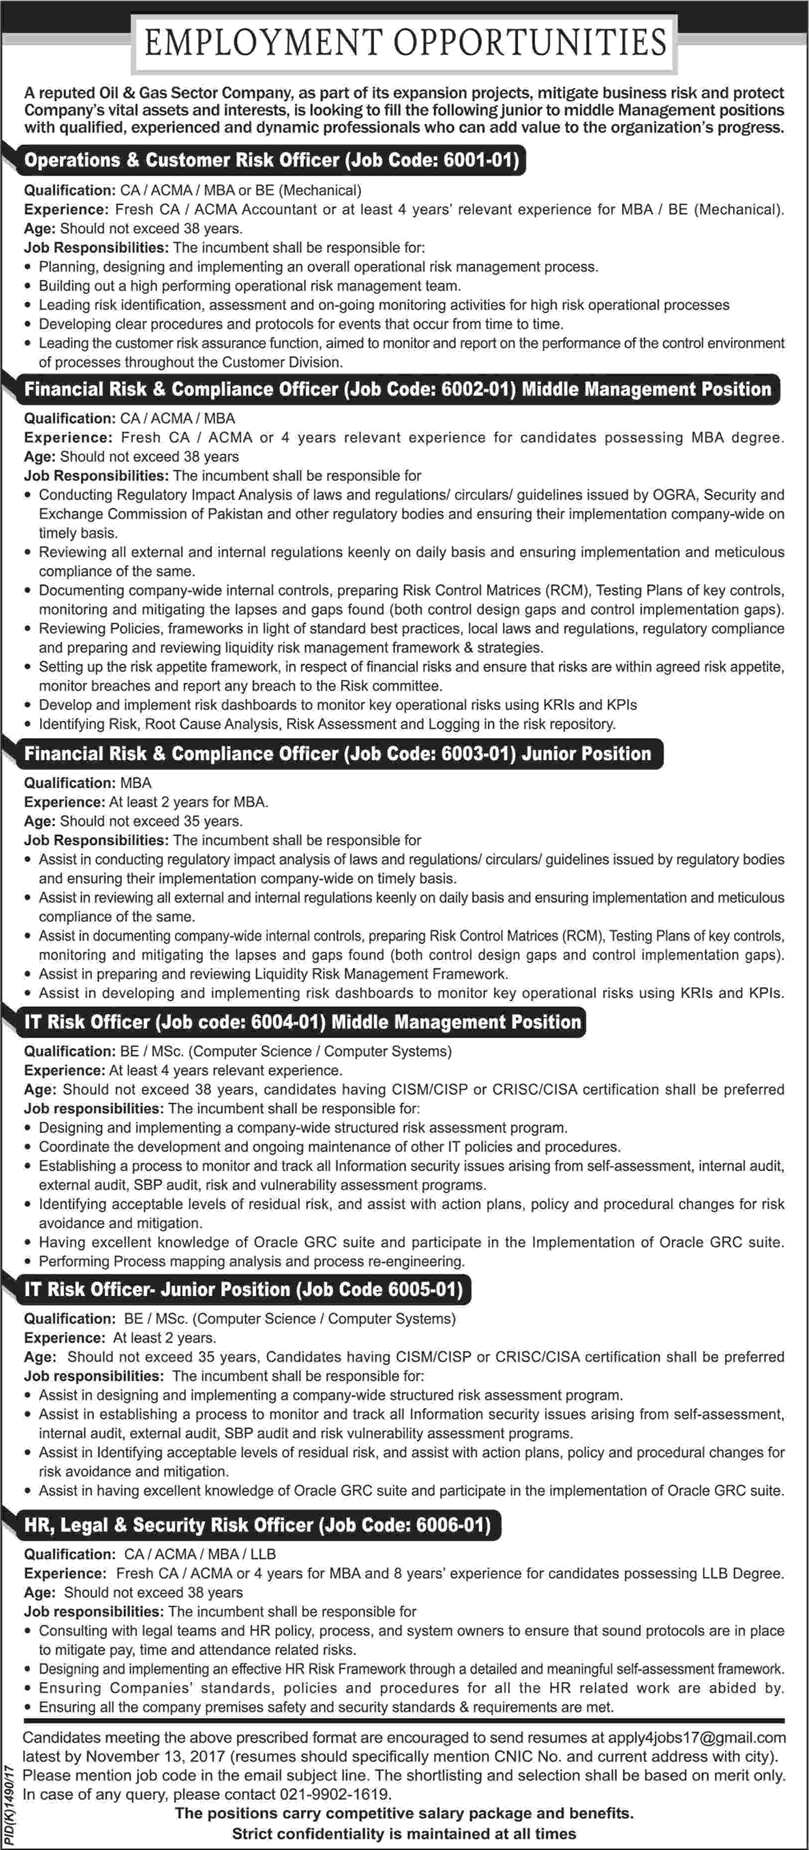 Oil and Gas Company Jobs in Pakistan October 2017 November IT Risk Officer & Others Latest